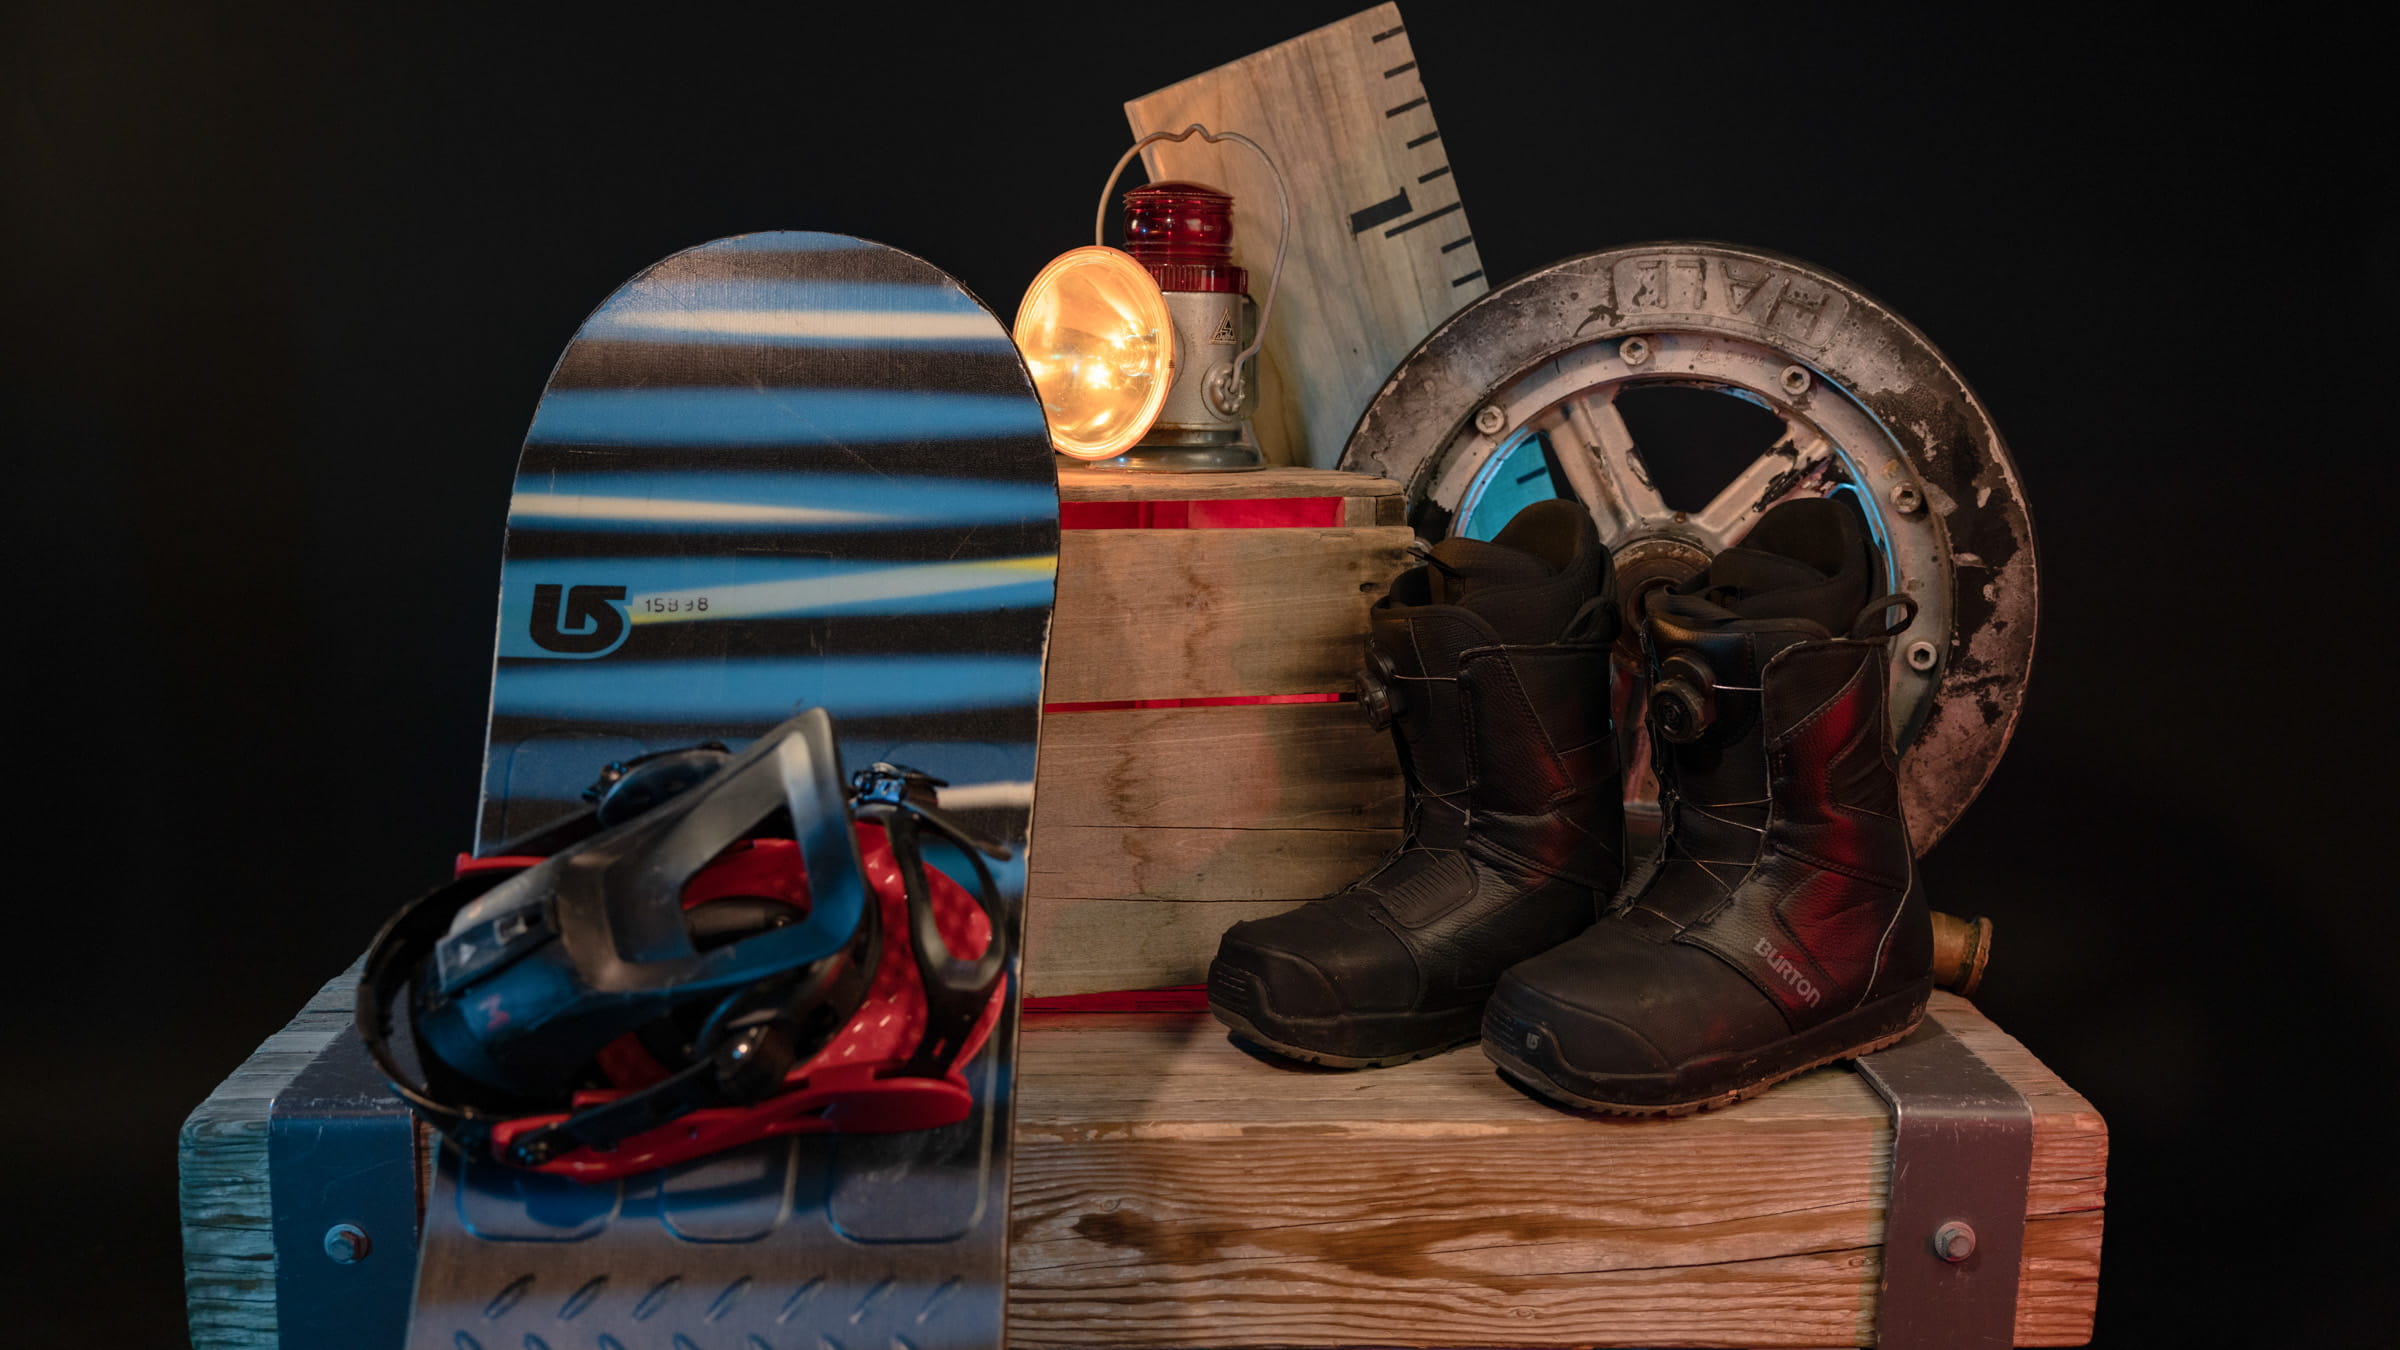 Snowboard with bindings and boots displayed against a wooden box